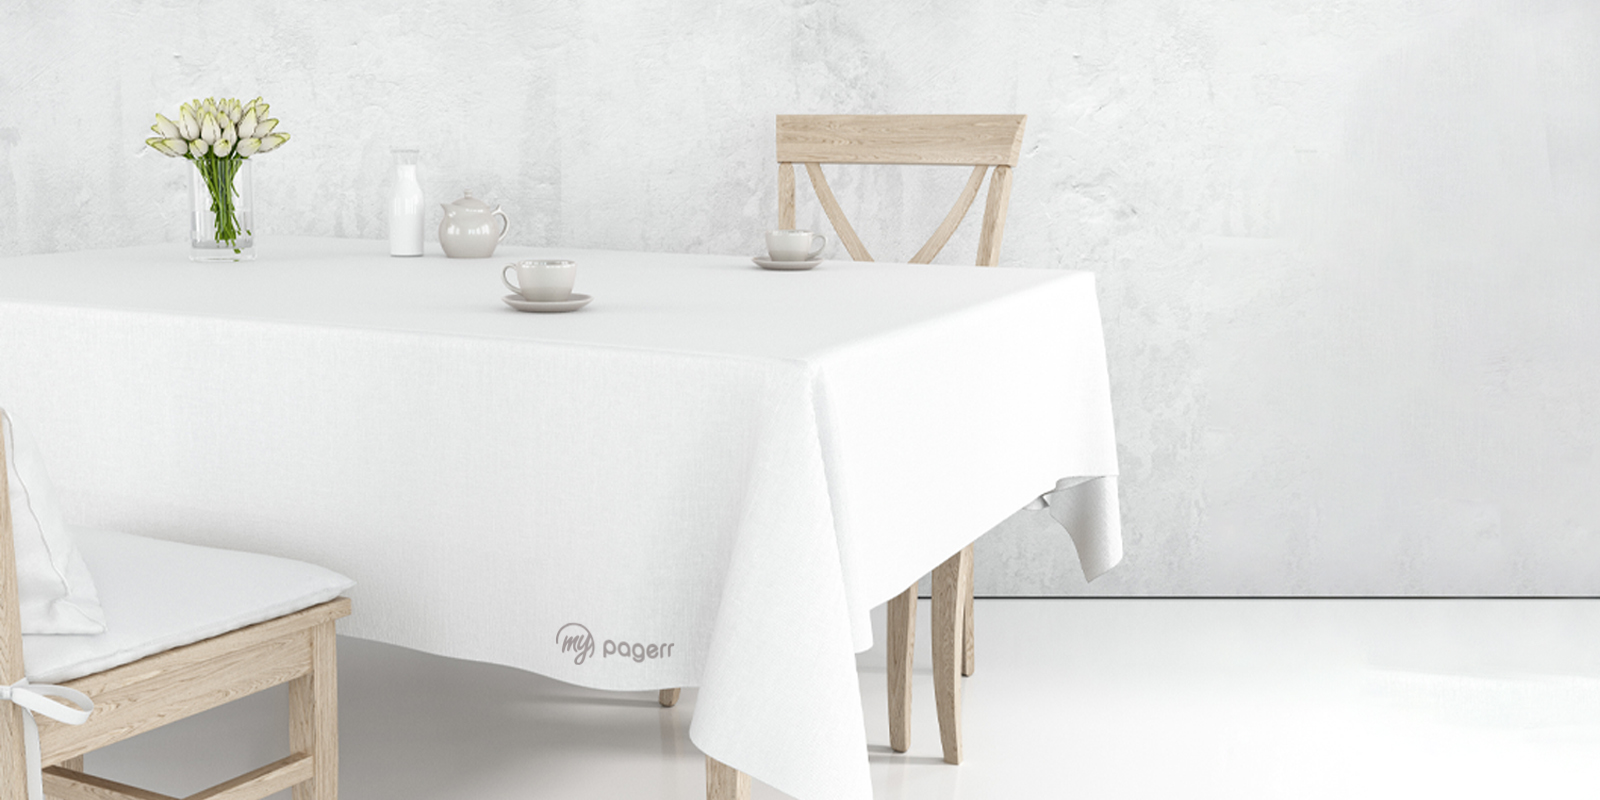 Tablecloths in Bendigo - Print with Pagerr